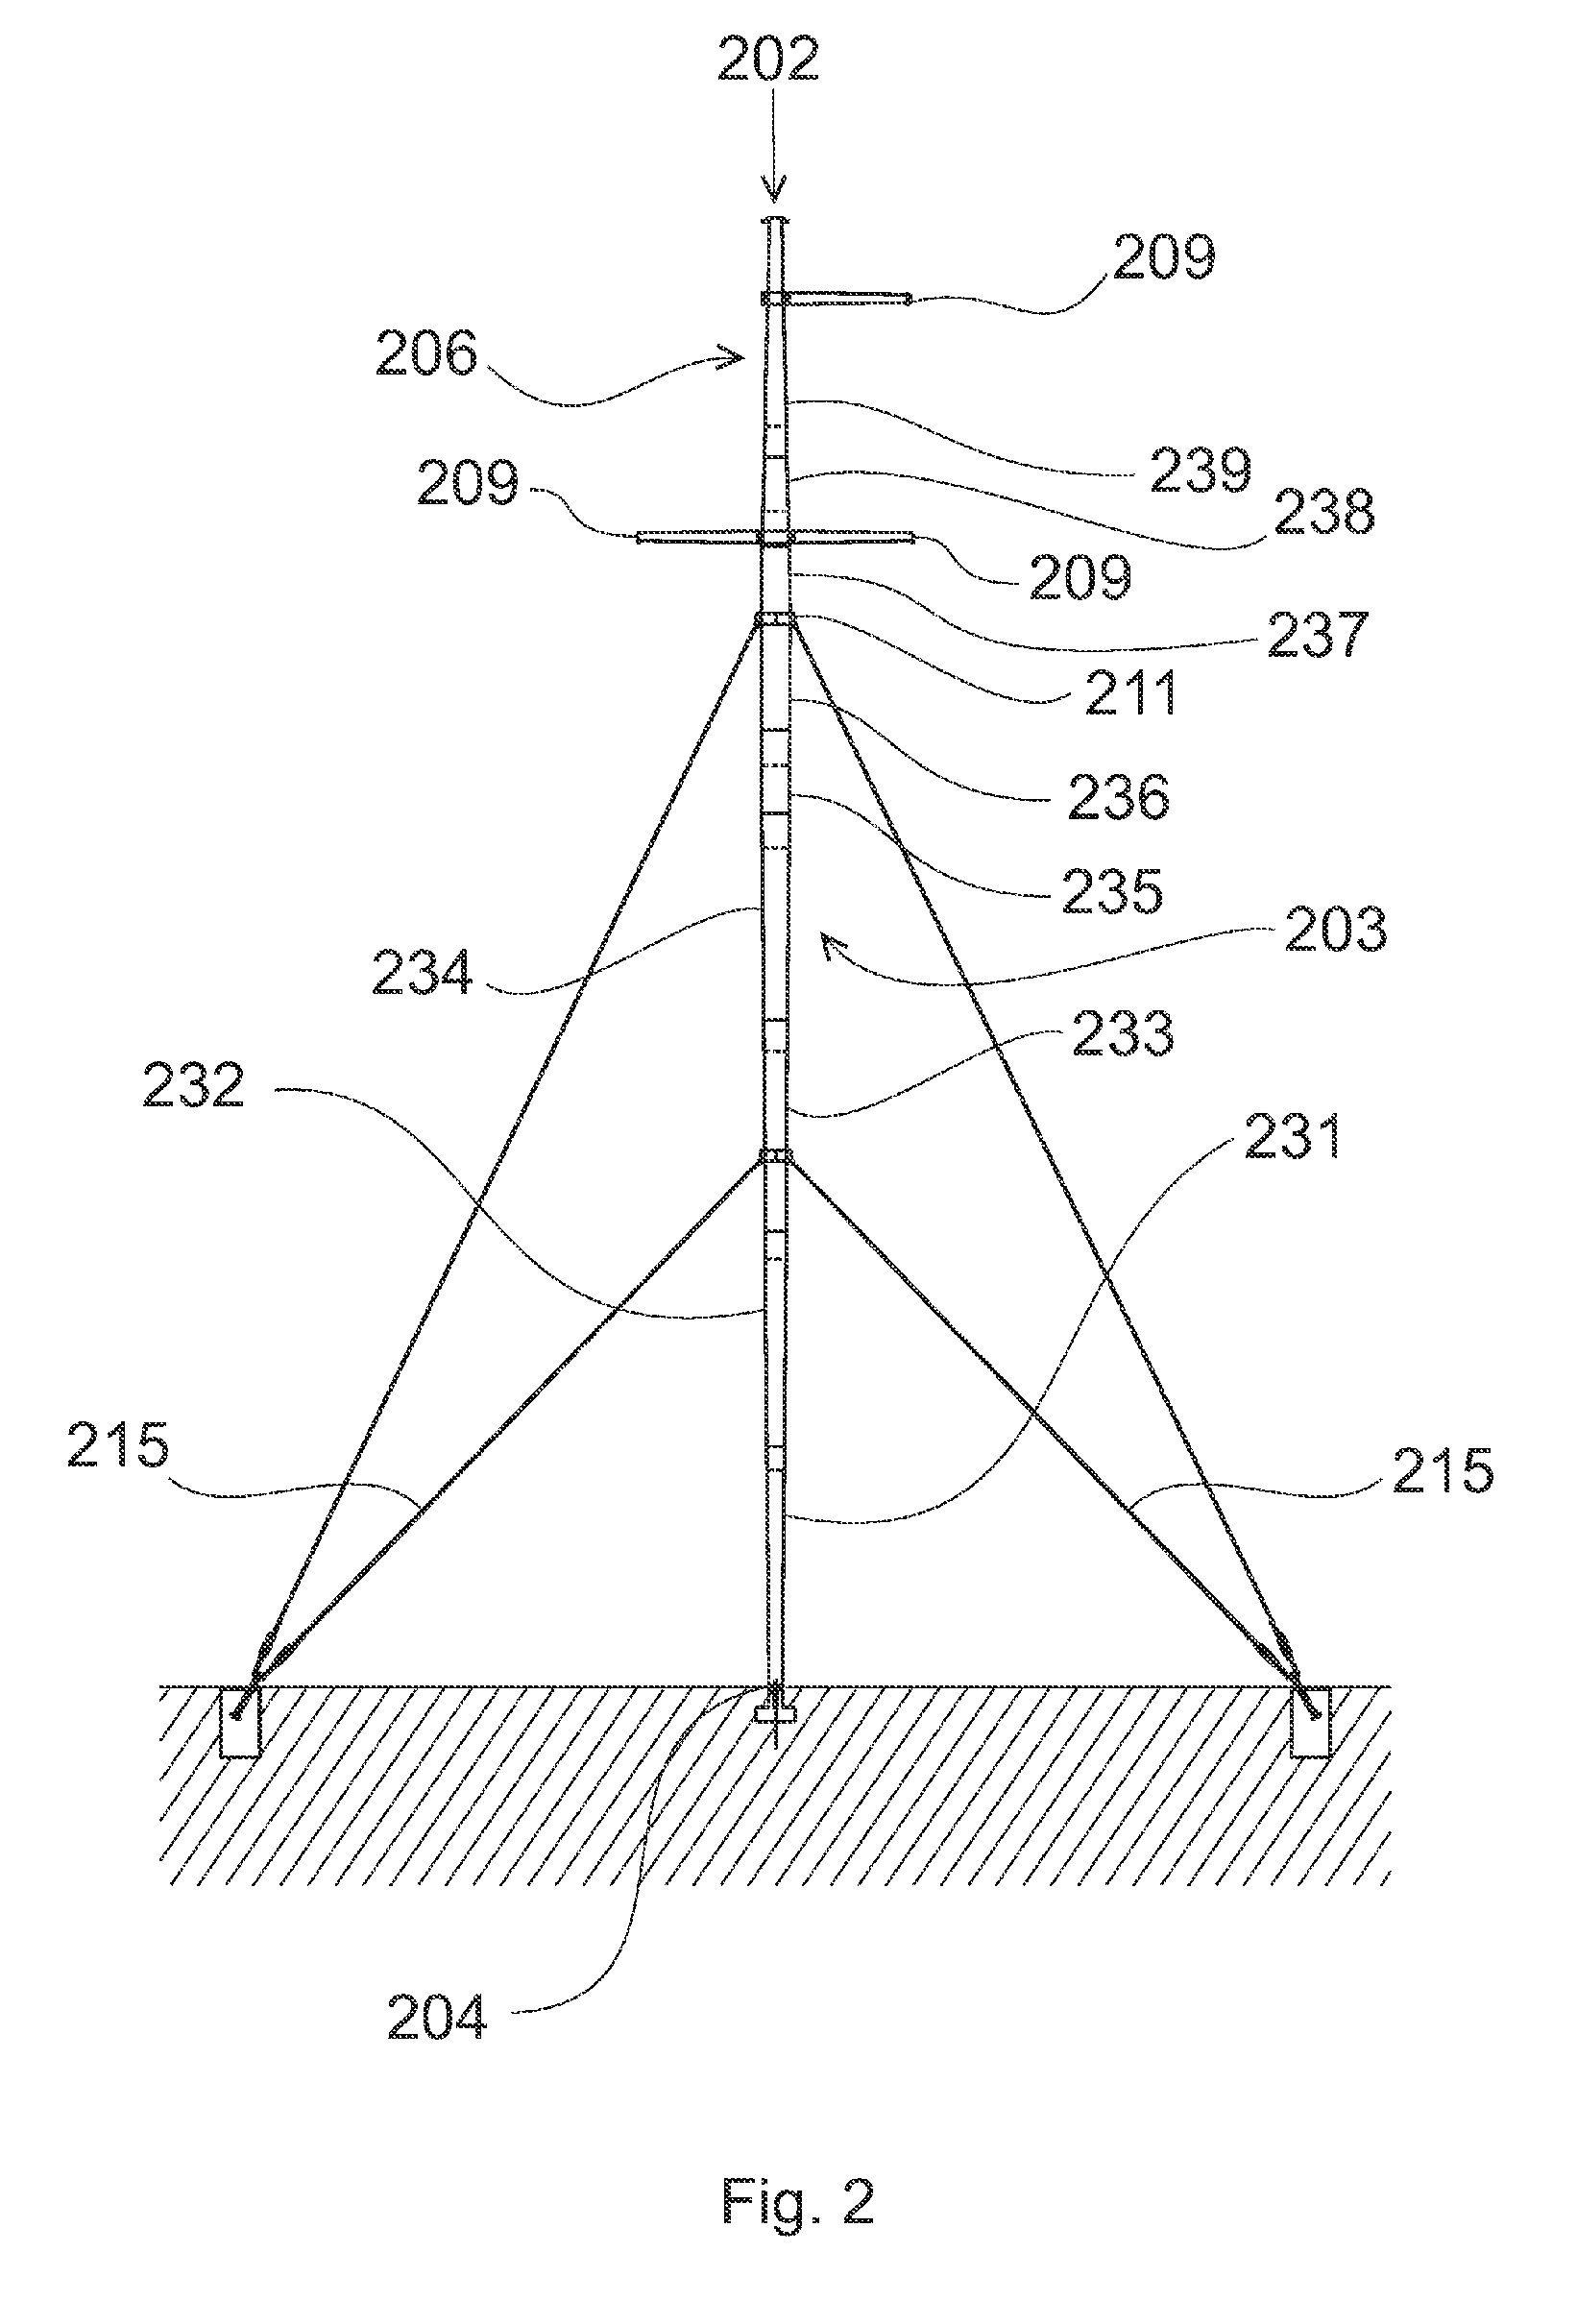 Structure for supporting electric power transmission lines